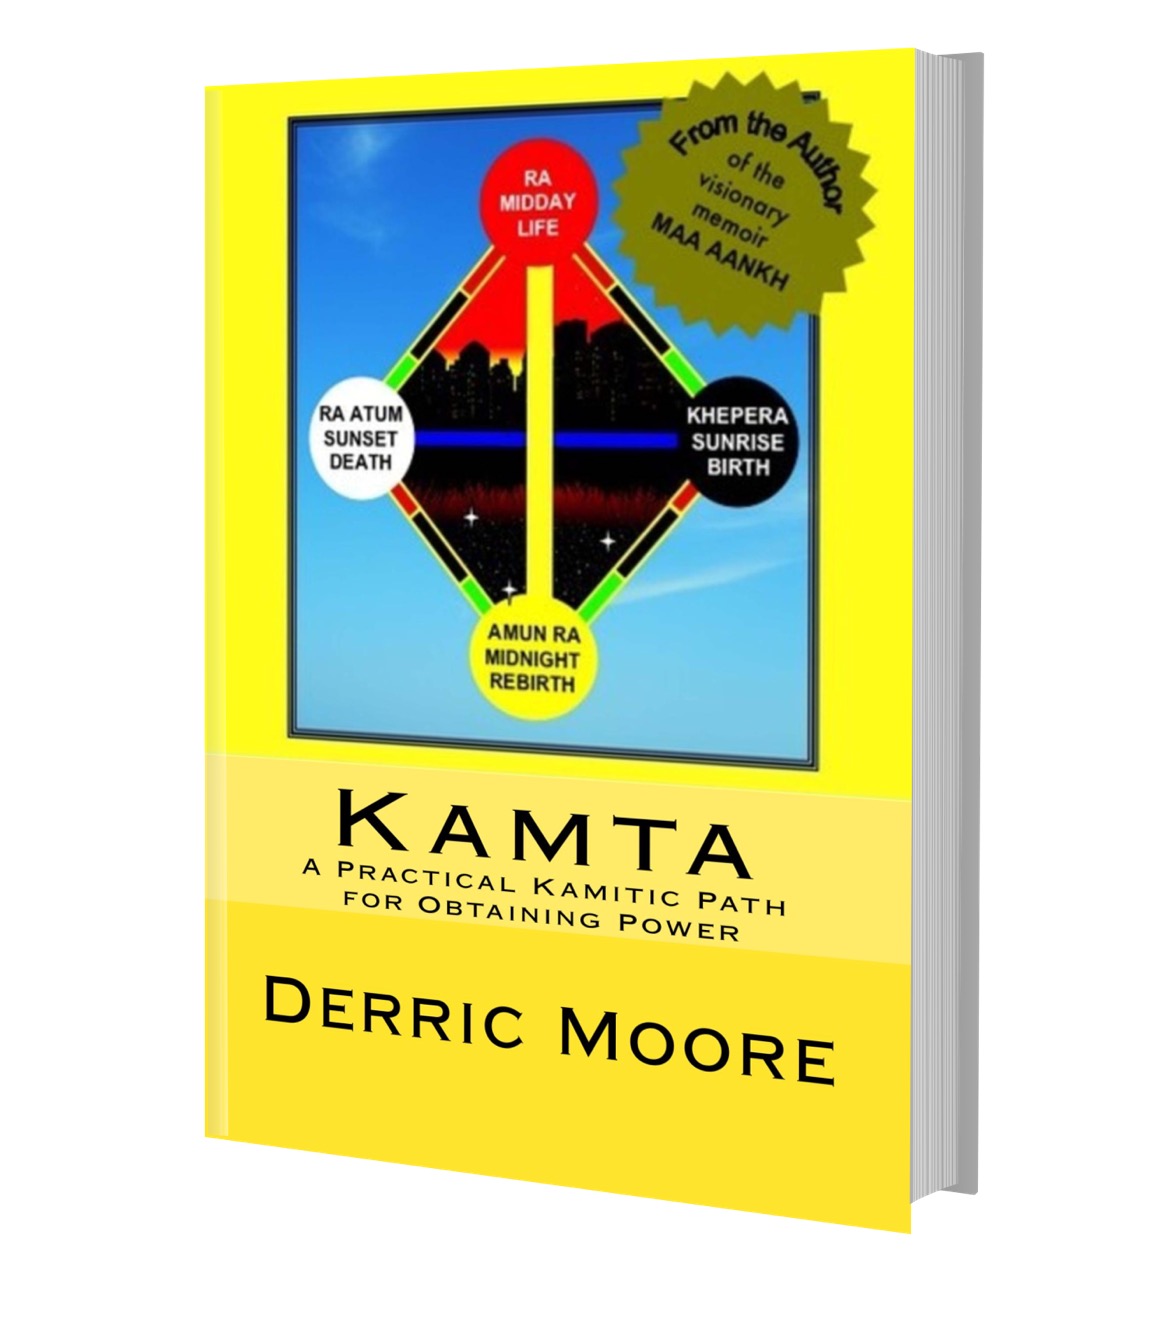 KAMTA: A Practical Kamitic Path for Obtaining Power